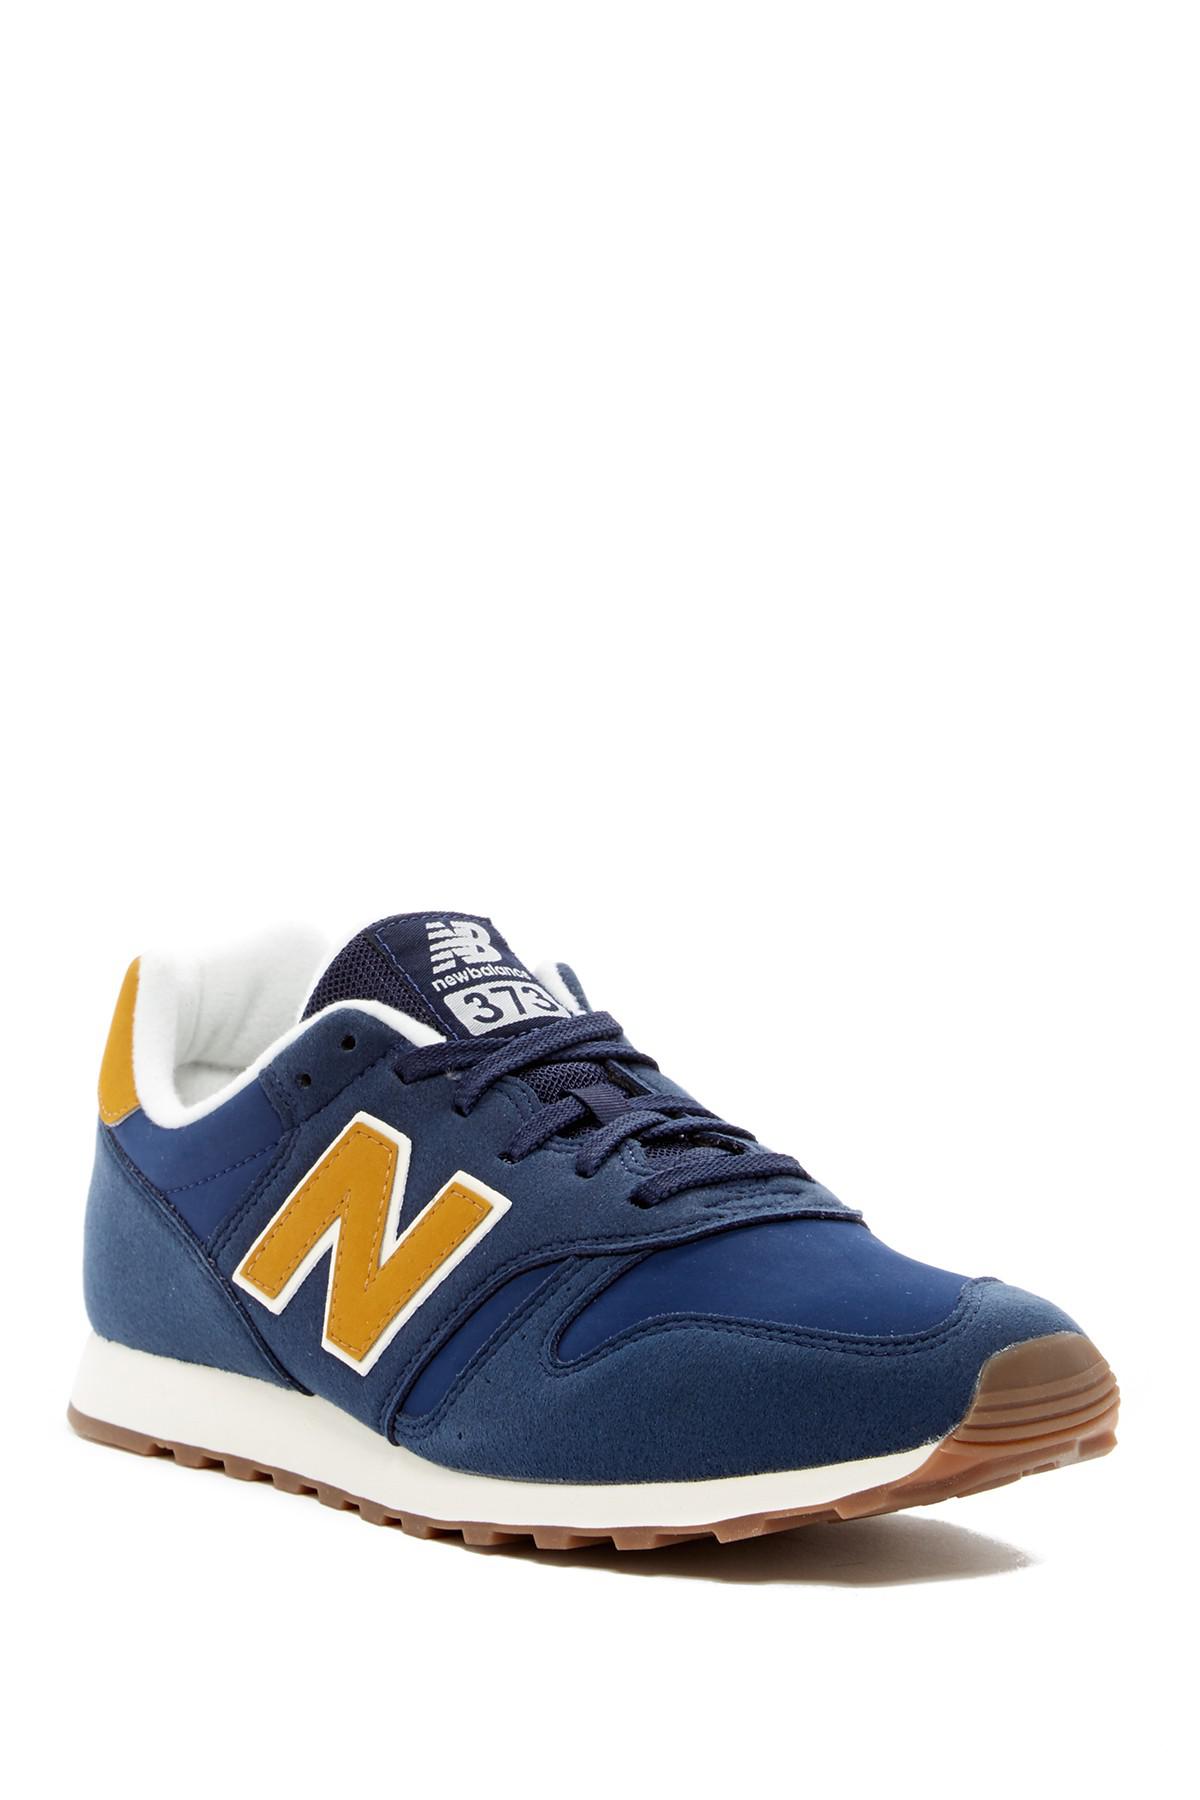 New Balance Ml373 Classic Sneaker - Wide Width Available in Blue-Yellow  (Blue) for Men - Lyst